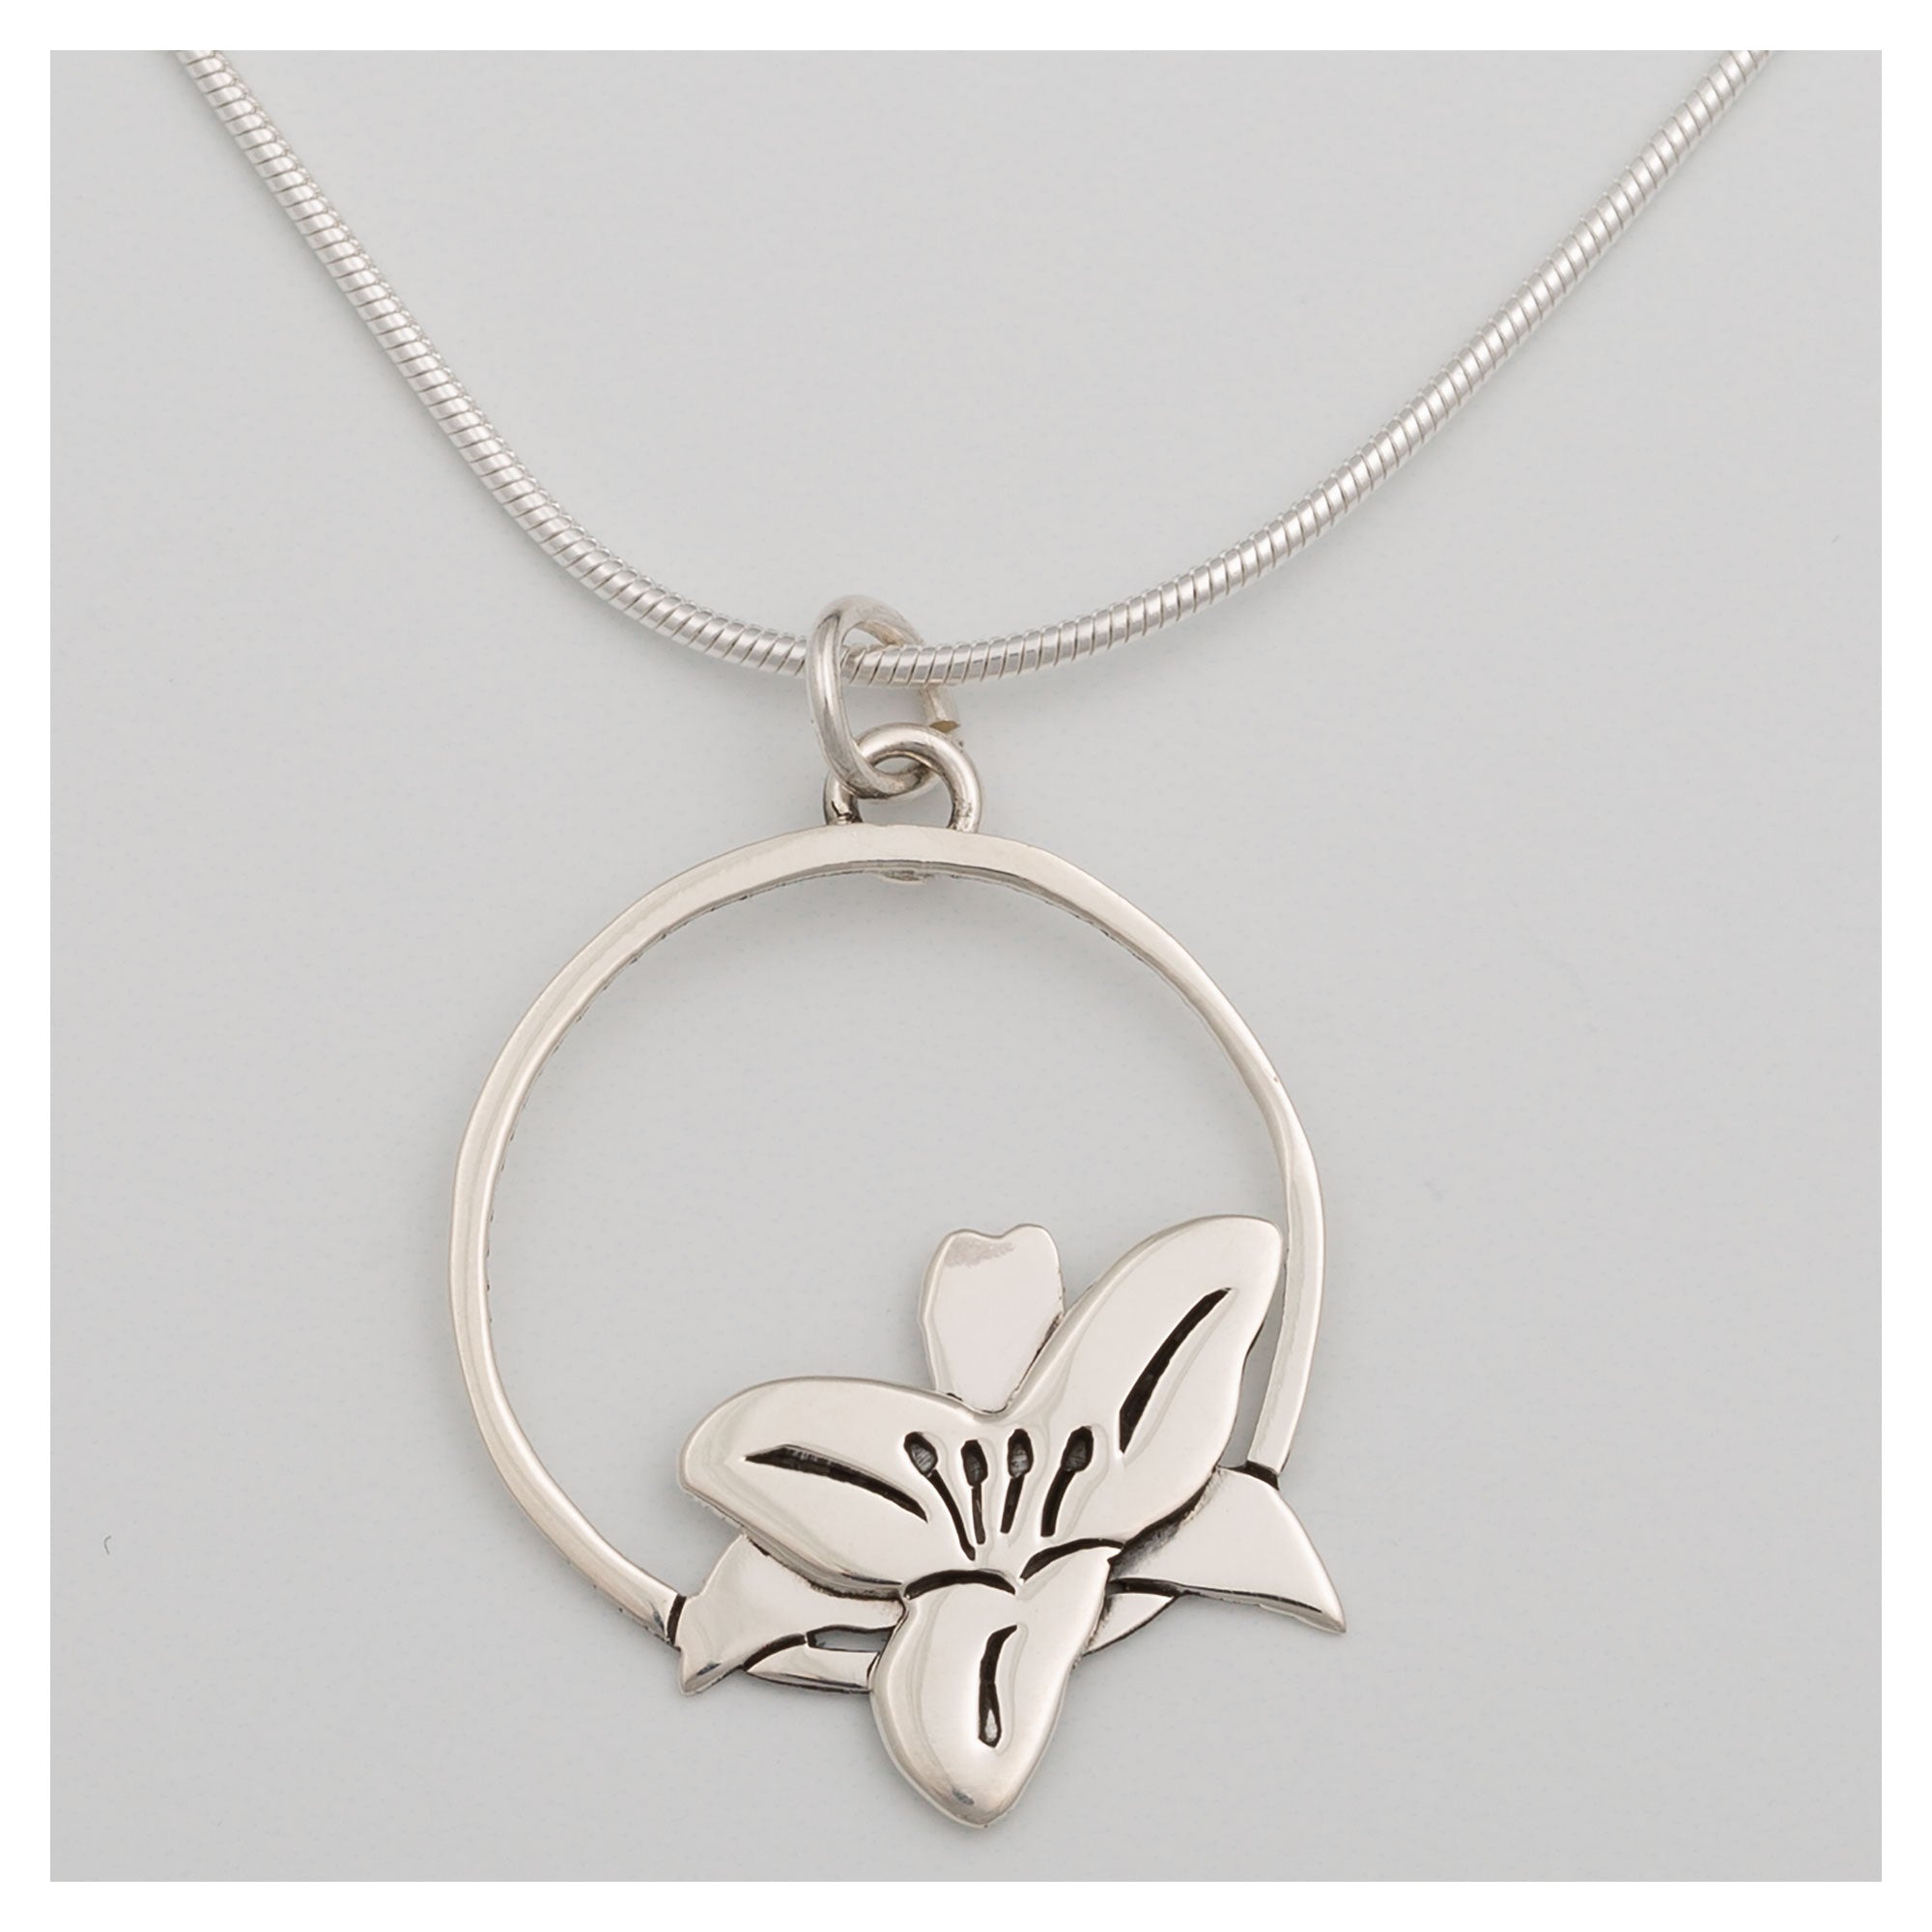 Blooming Flowers Sterling Necklace - Water Lily - With Sterling Cable Chain